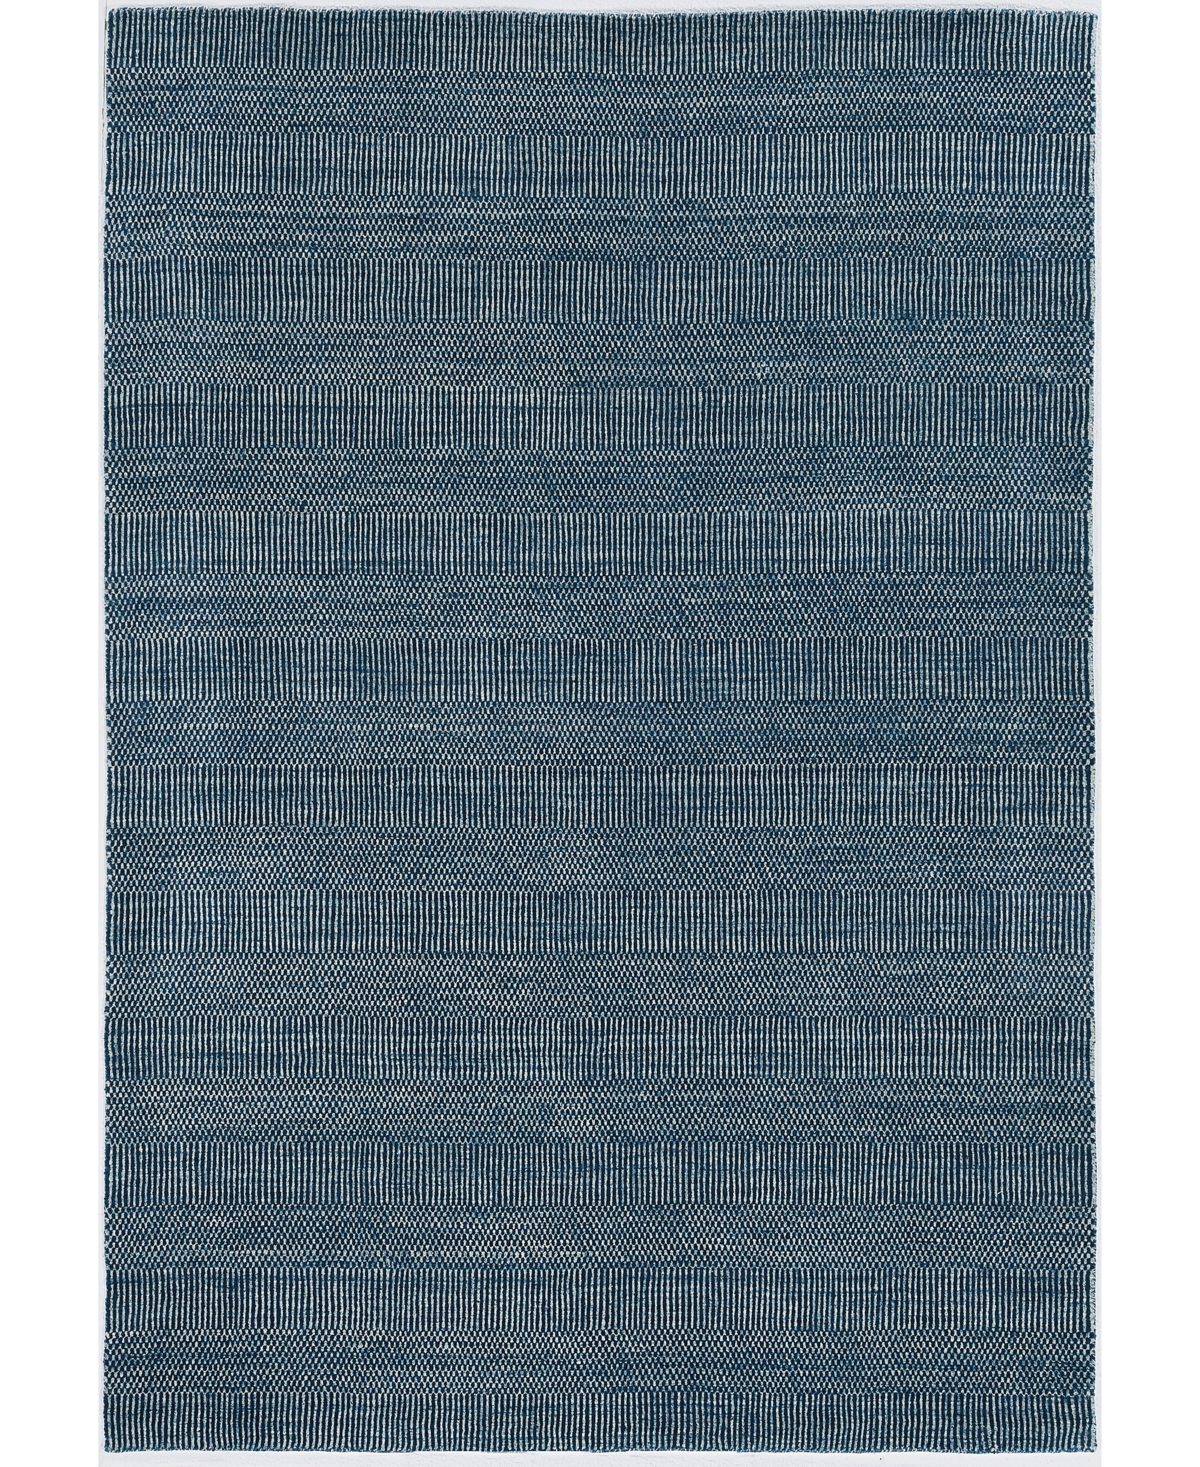 Km Home Alleanza 200 8' X 10' Area Rug In Teal